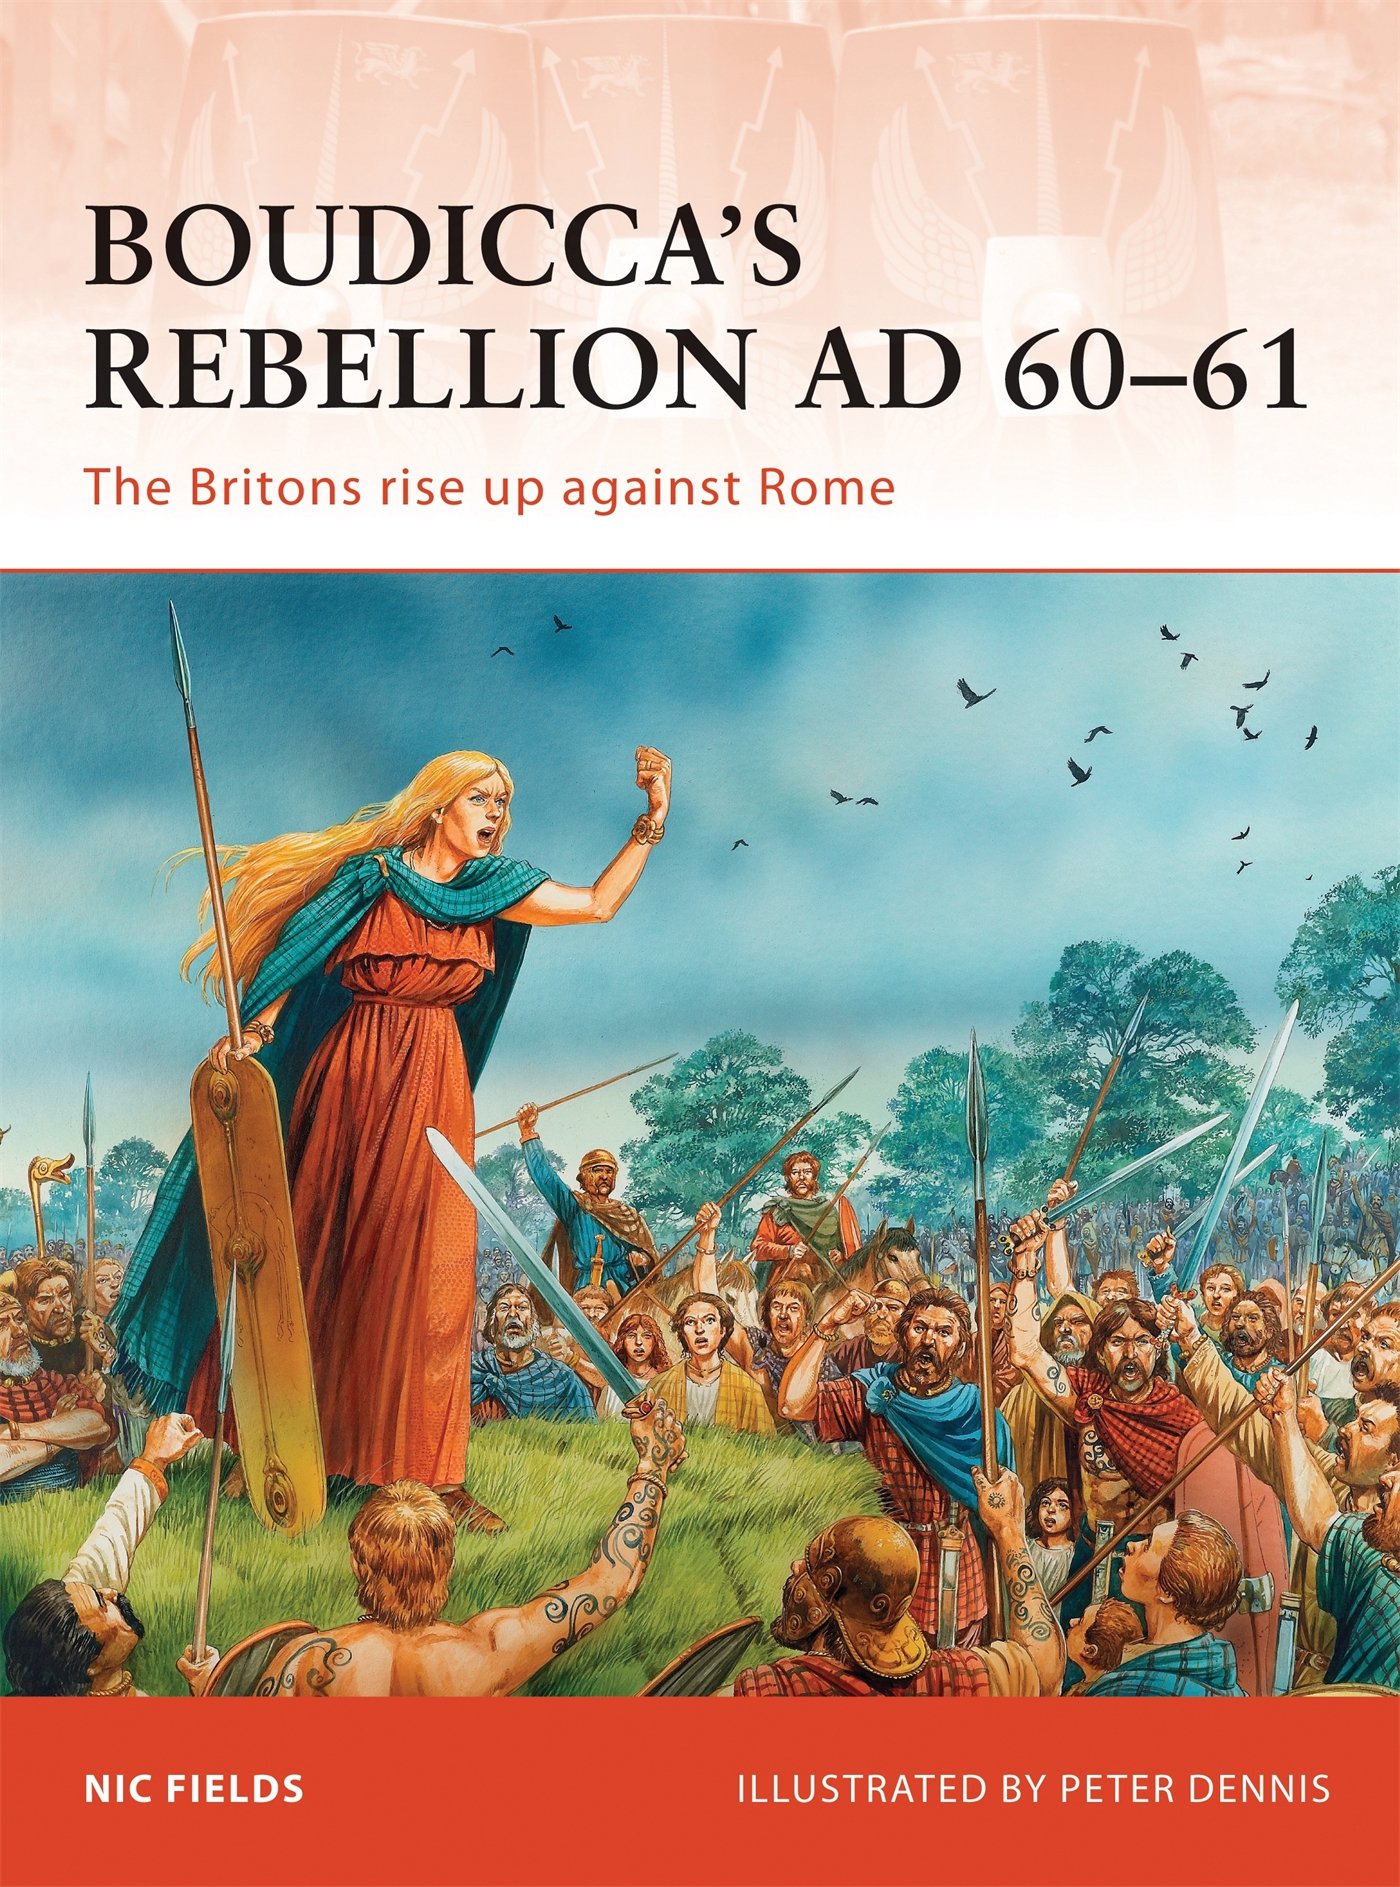 Boudicca's Rebellion AD 60-61: The Britons Rise Up Against Rome